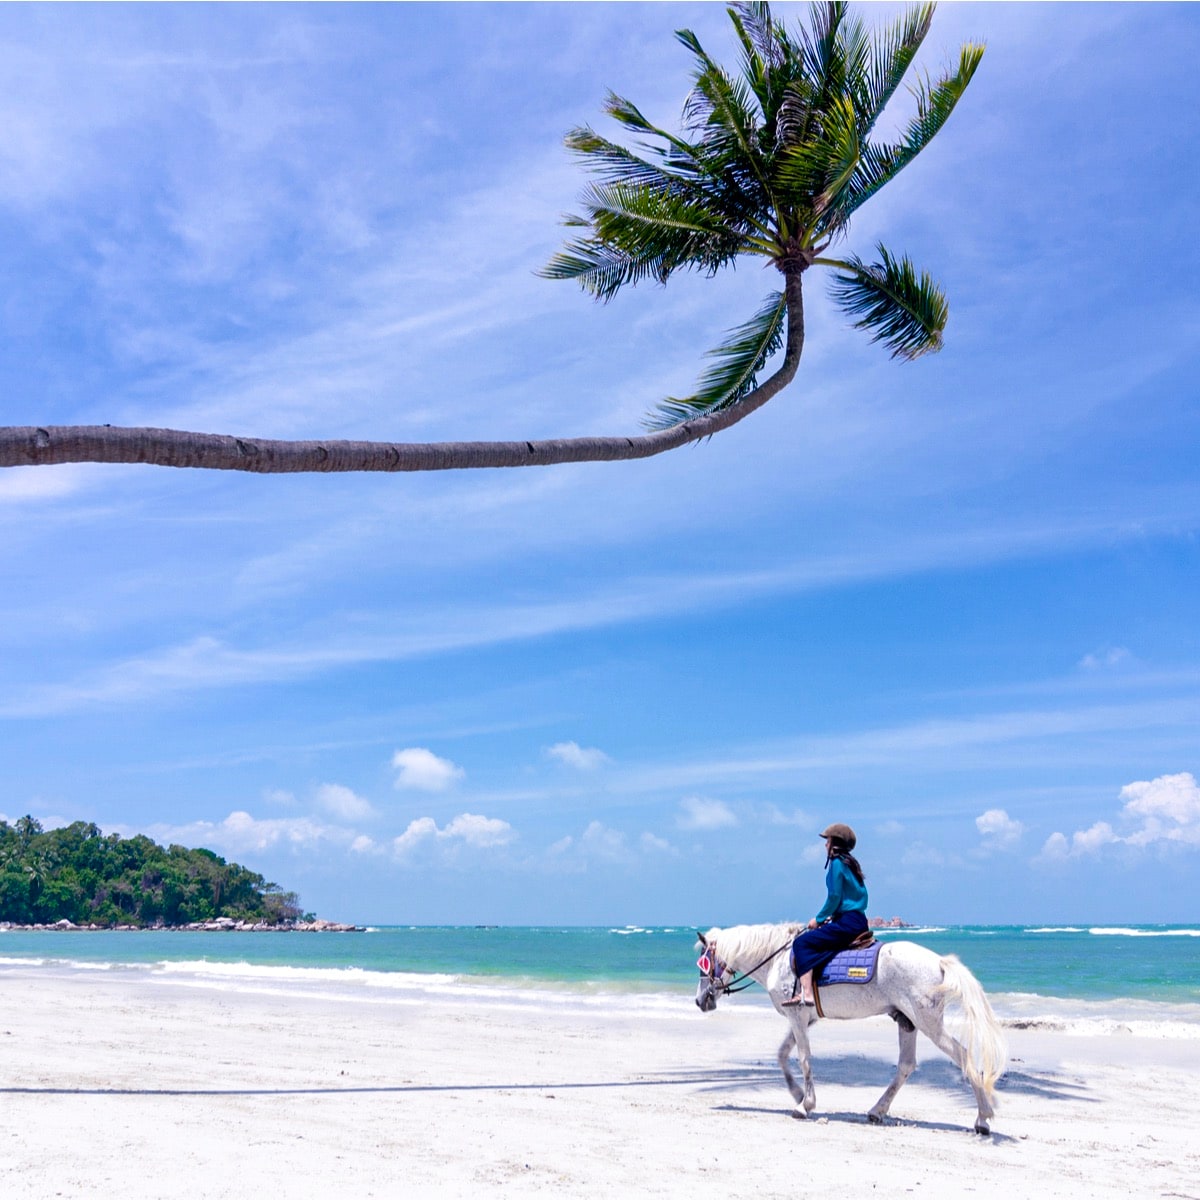 Ever Heard about Bintan Island? Get to Know More!